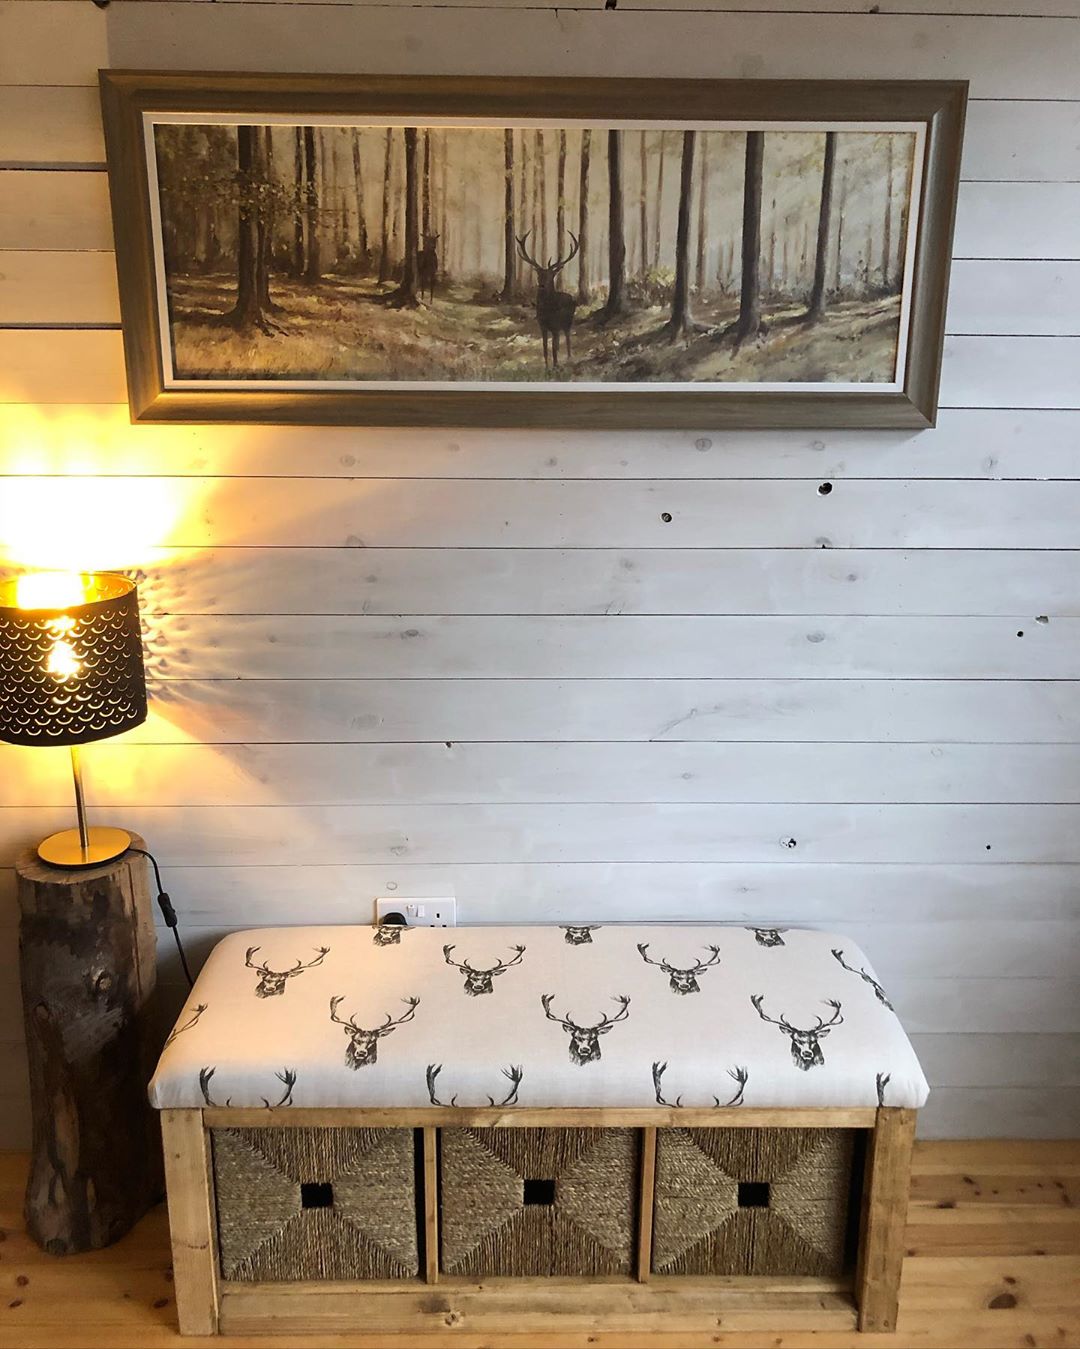 Simple Storage Bench Against a Shiplapped Wall. Photo by Instagram user @liamarieclarke